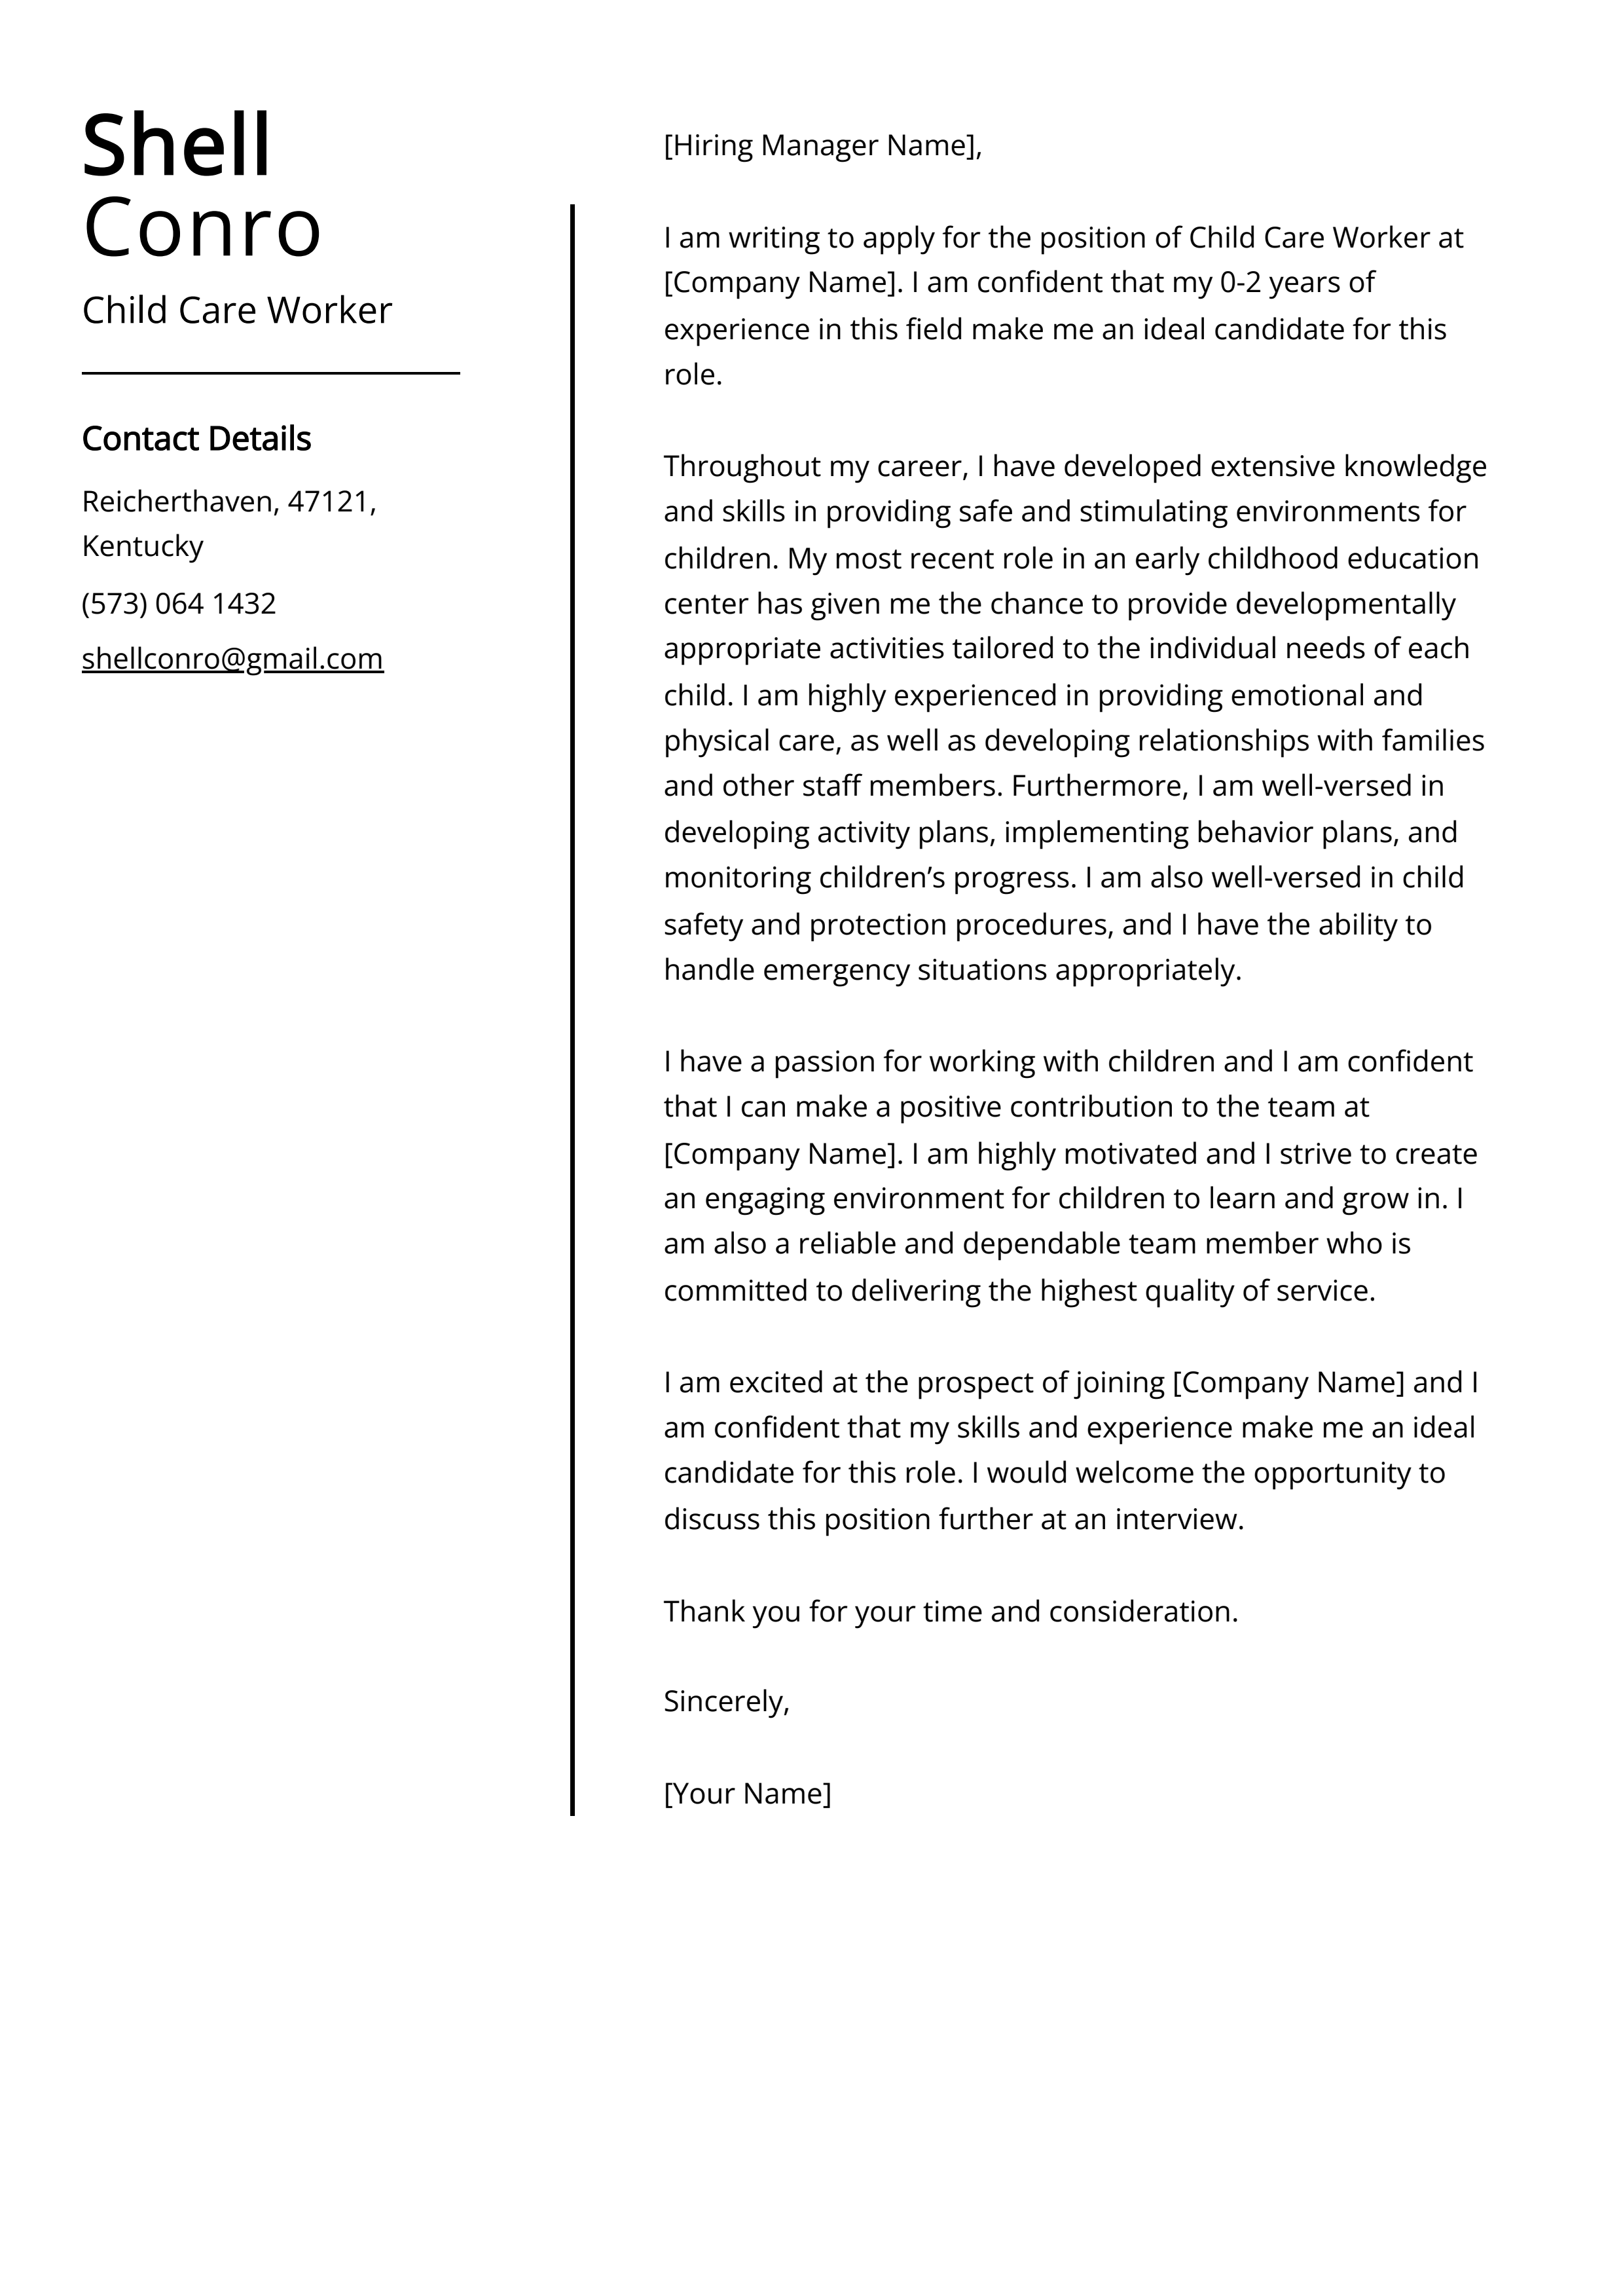 Child Care Worker Cover Letter Example